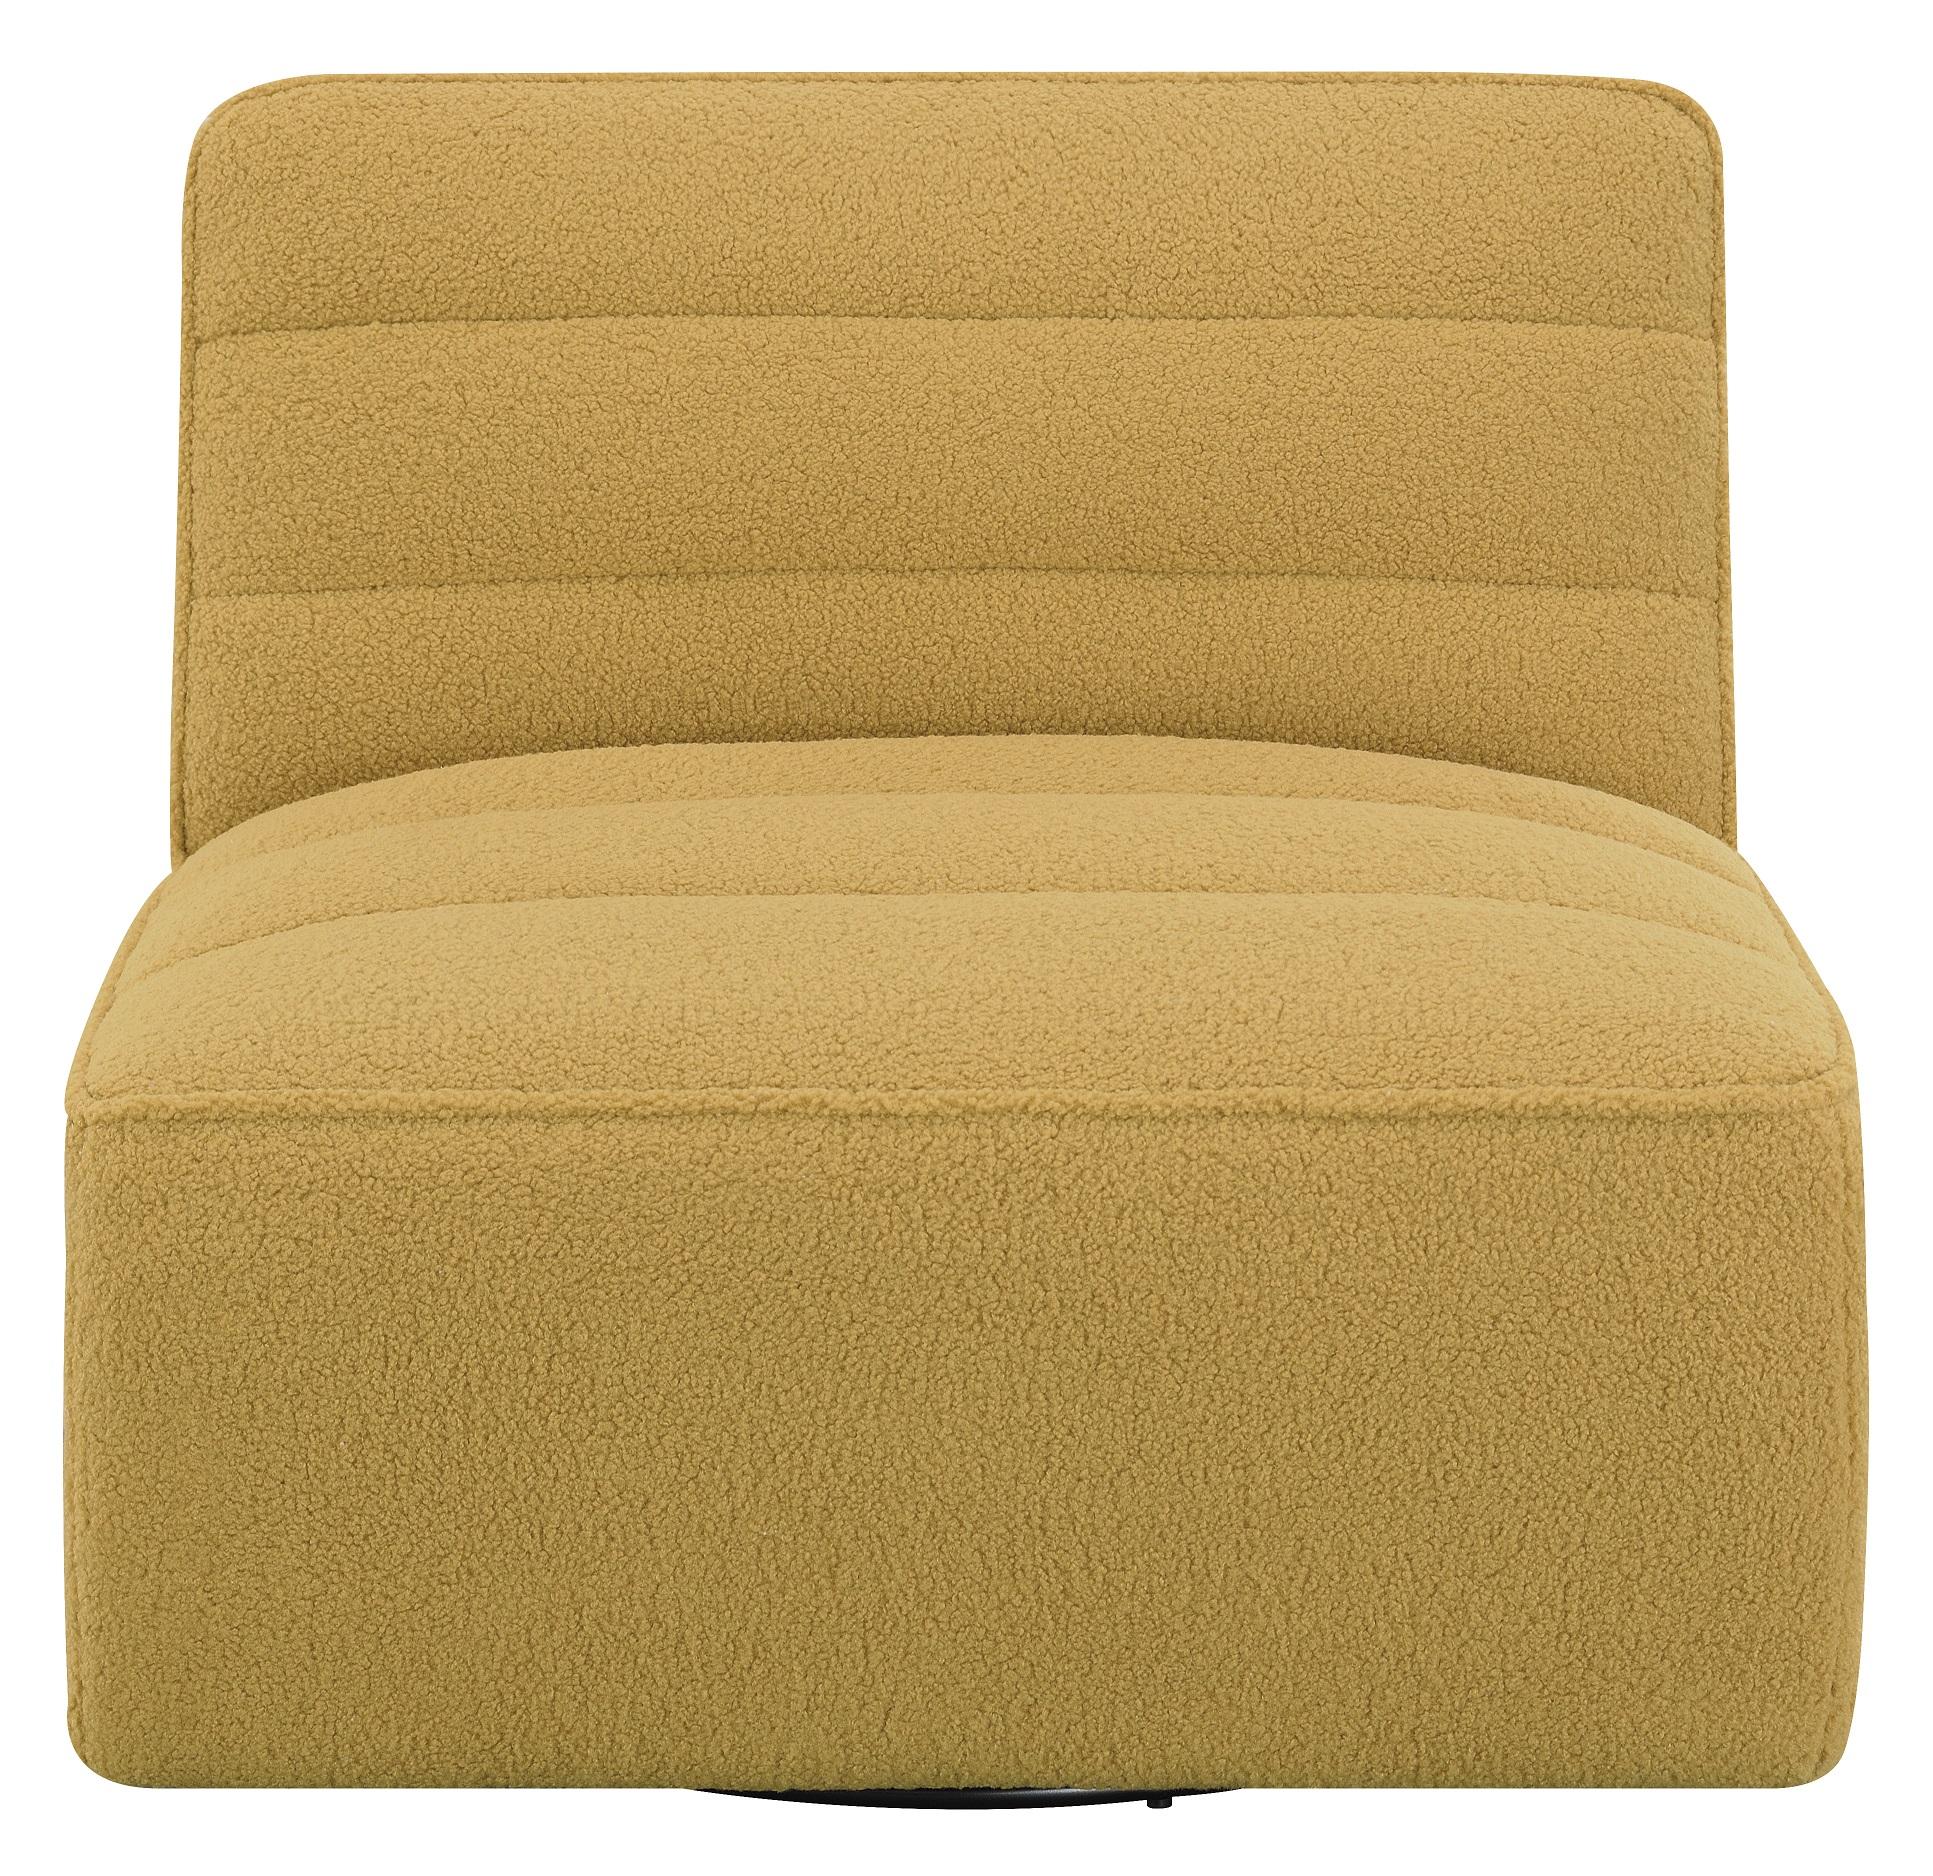 Contemporary Armless Chair 905724 905724 in Yellow 